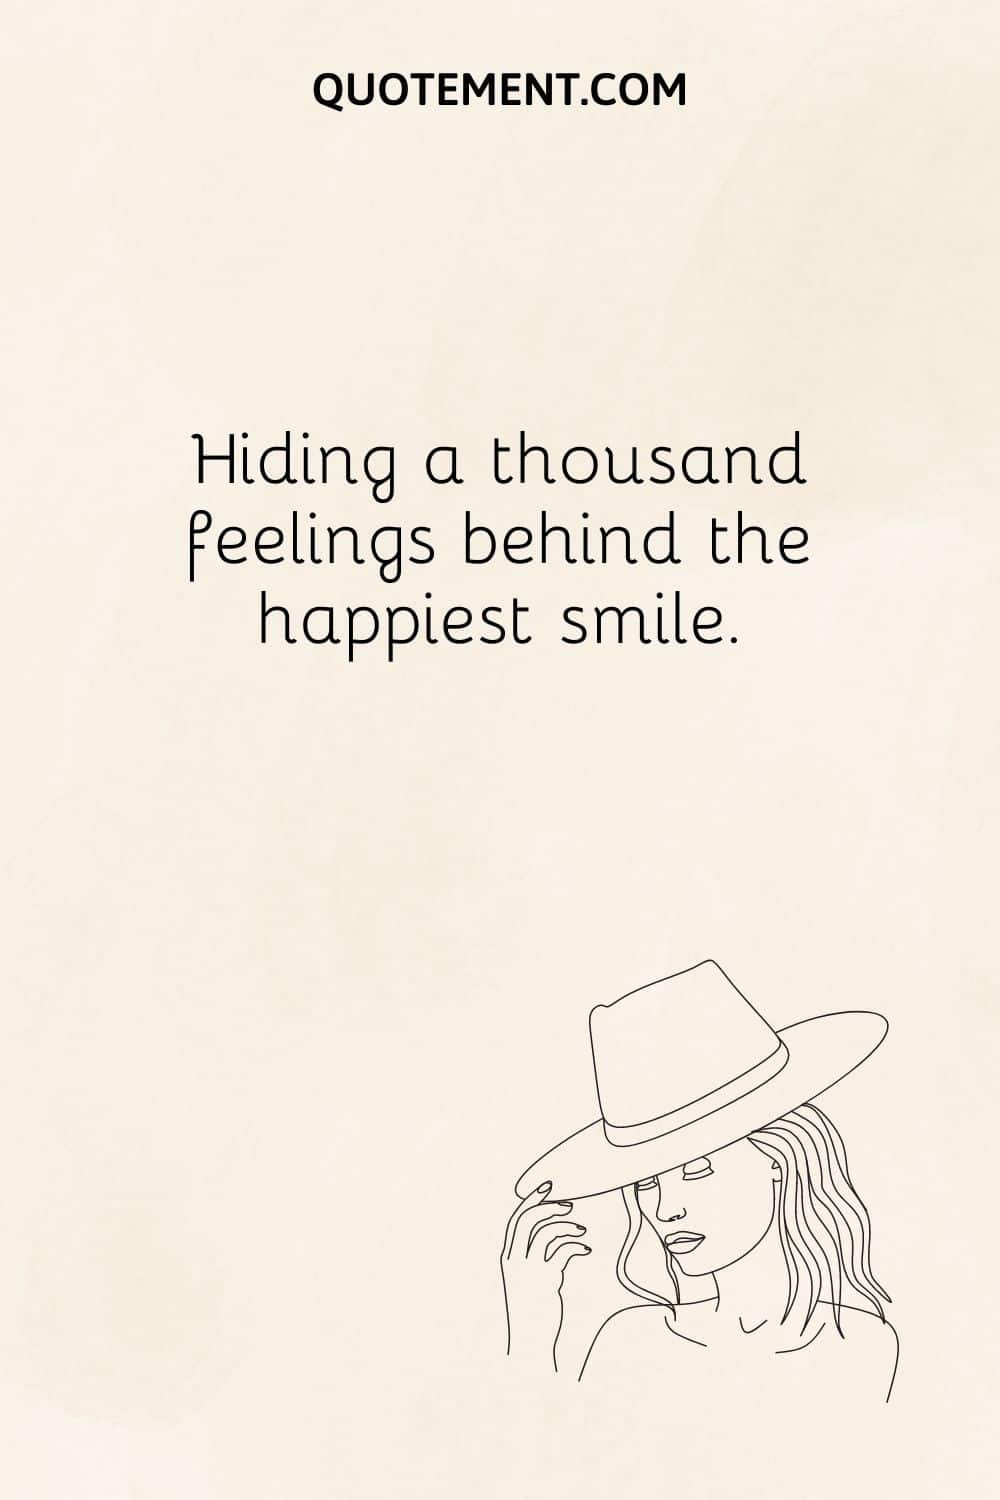 Hiding a thousand feelings behind the happiest smile.
